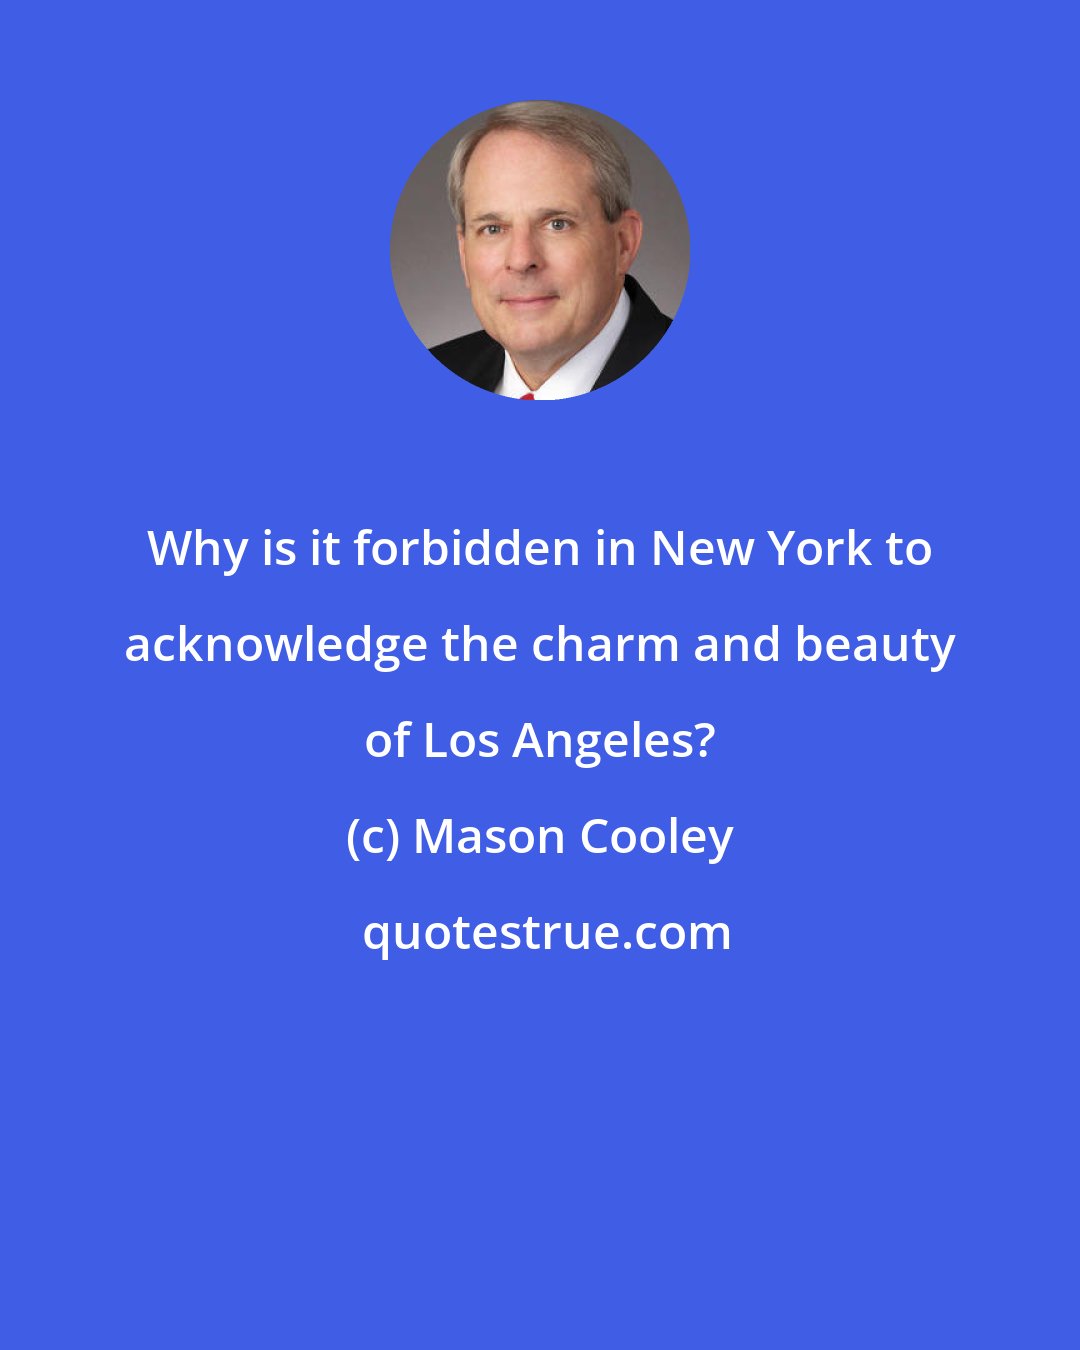 Mason Cooley: Why is it forbidden in New York to acknowledge the charm and beauty of Los Angeles?